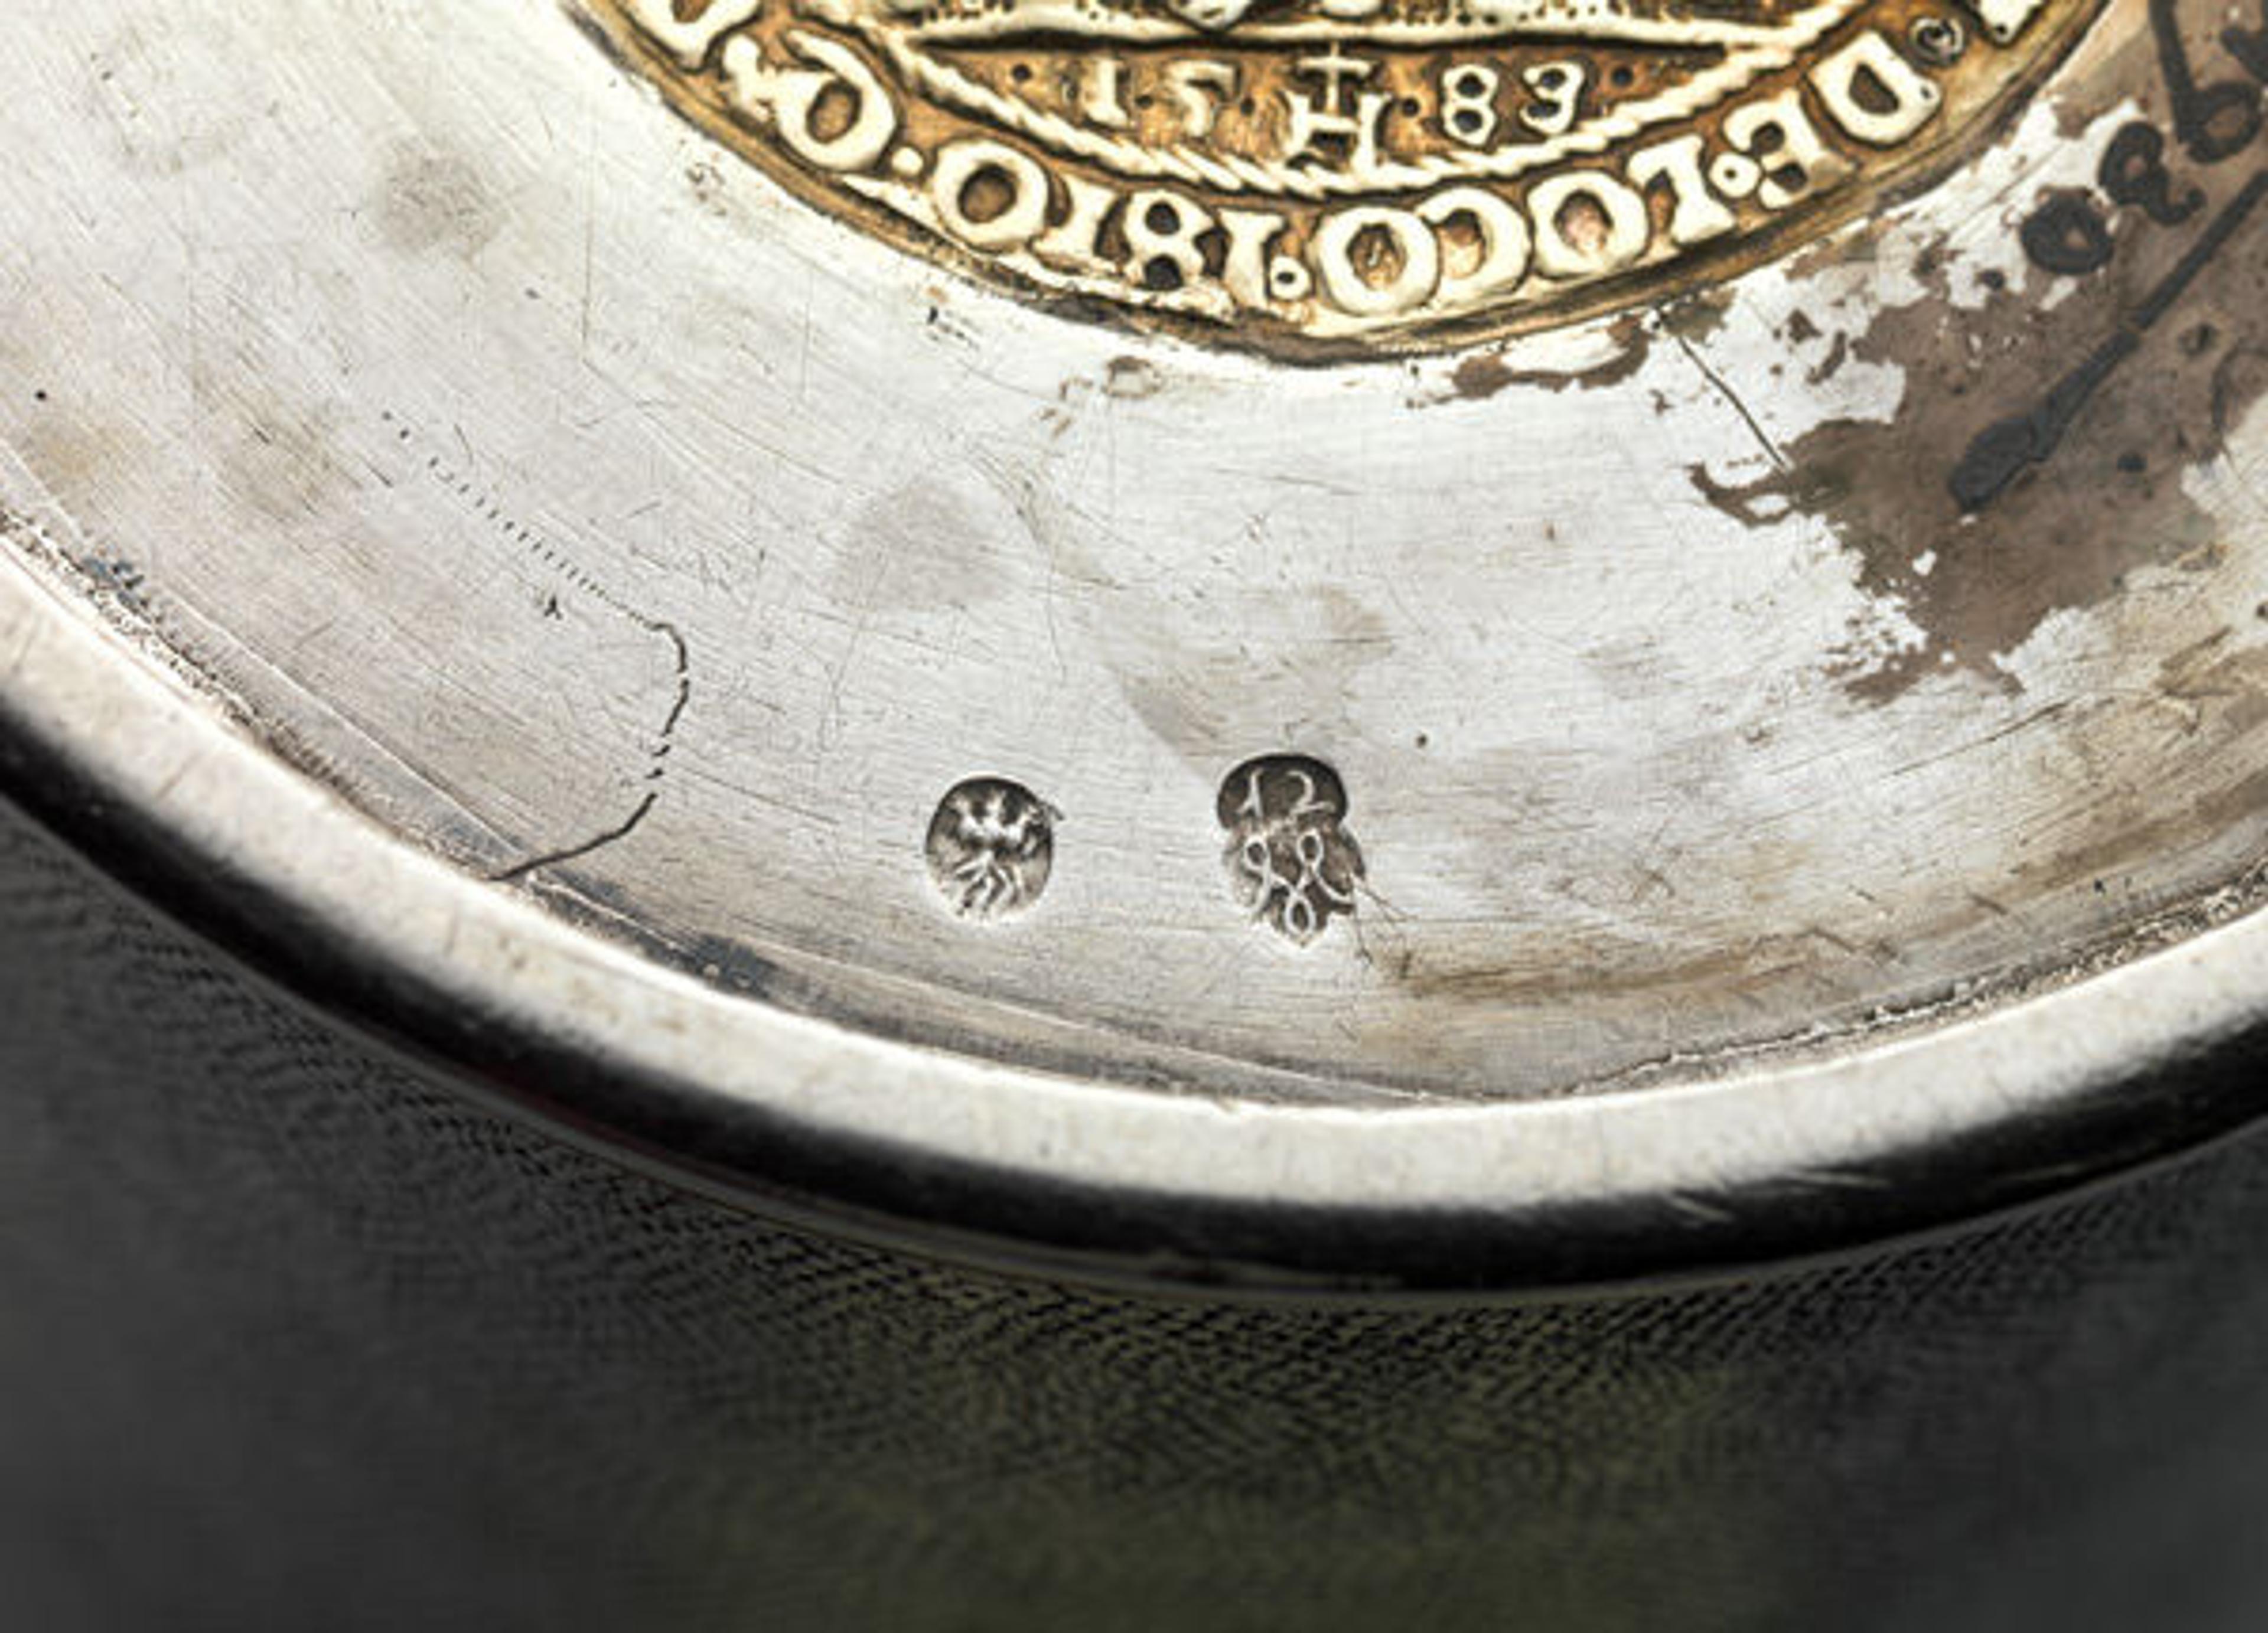 On the underside of this beaker, the town mark of Brassó (in present-day Romania) can be seen on the left, and the maker's mark of Michael May II on the right. Michael May II (active 1731–76). Beaker, ca. 1740. Hungarian, Brassó. Silver, partly gilded; Overall: 6 x 4 1/4 in. (15.3 x 10.8 cm). The Metropolitan Museum of Art, New York, Gift of The Salgo Trust for Education, New York, in memory of Nicolas M. Salgo, 2010 (2010.110.54)